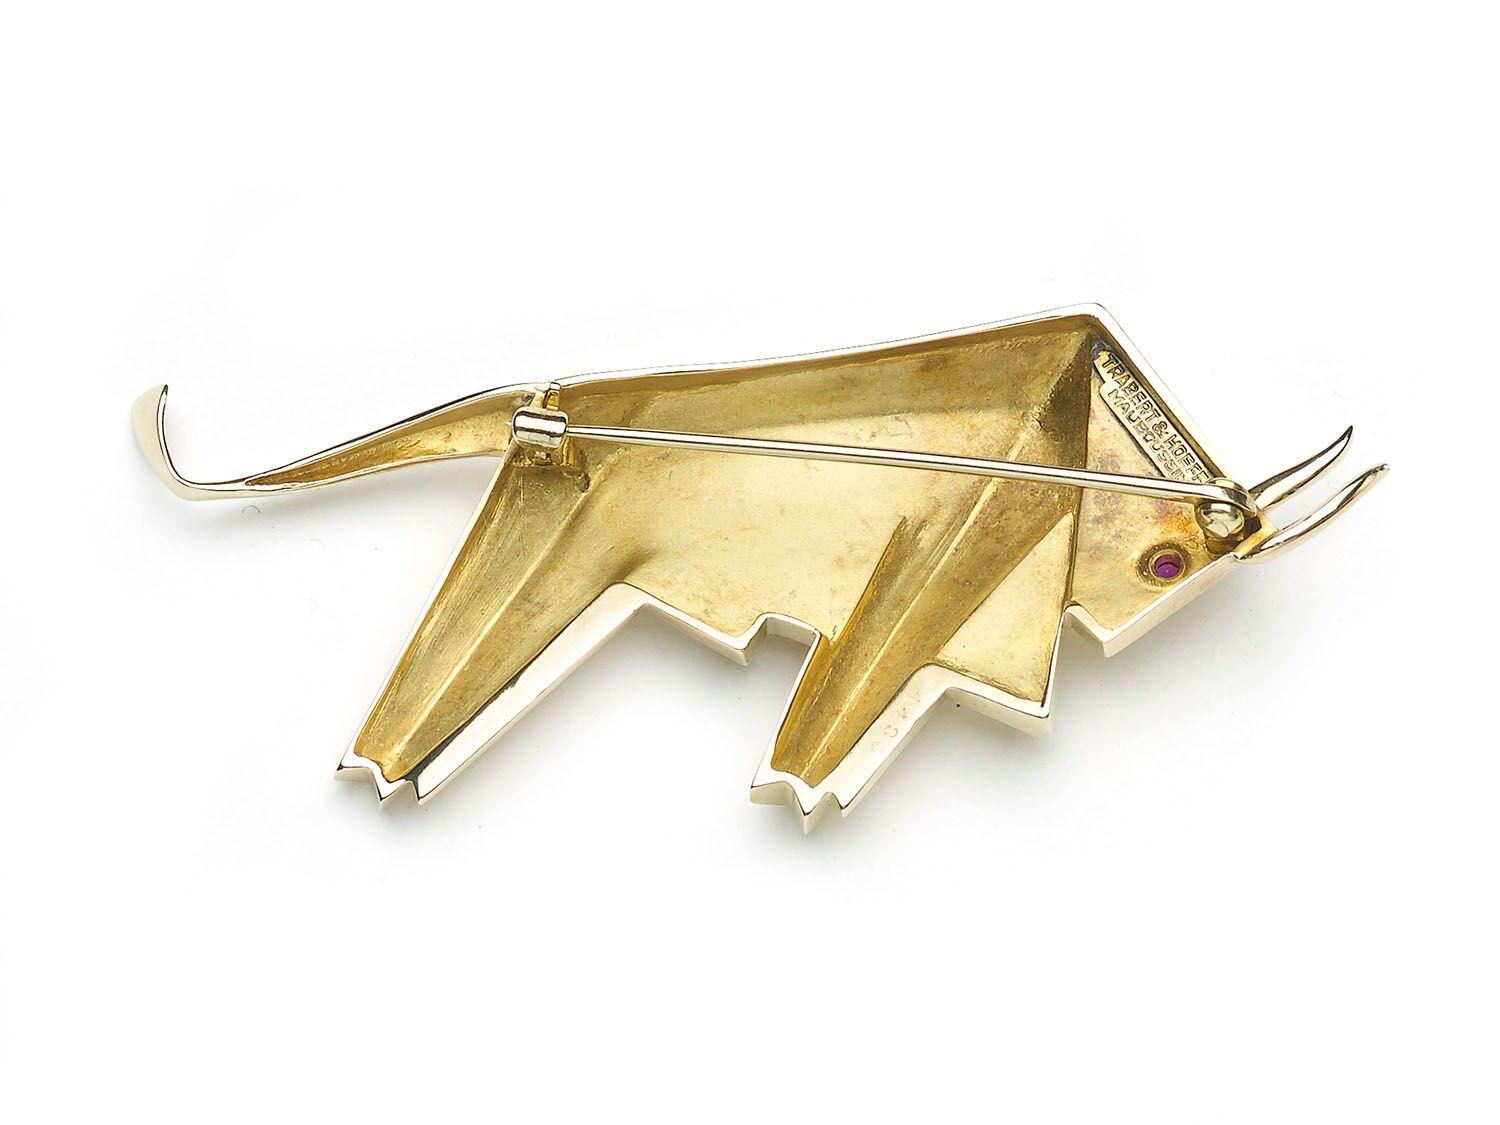 A modernist Trabert & Hoeffer – Mauboussin gold bull brooch, with a cabochon-cut ruby eye, mounted in 18ct yellow gold, circa 1945.